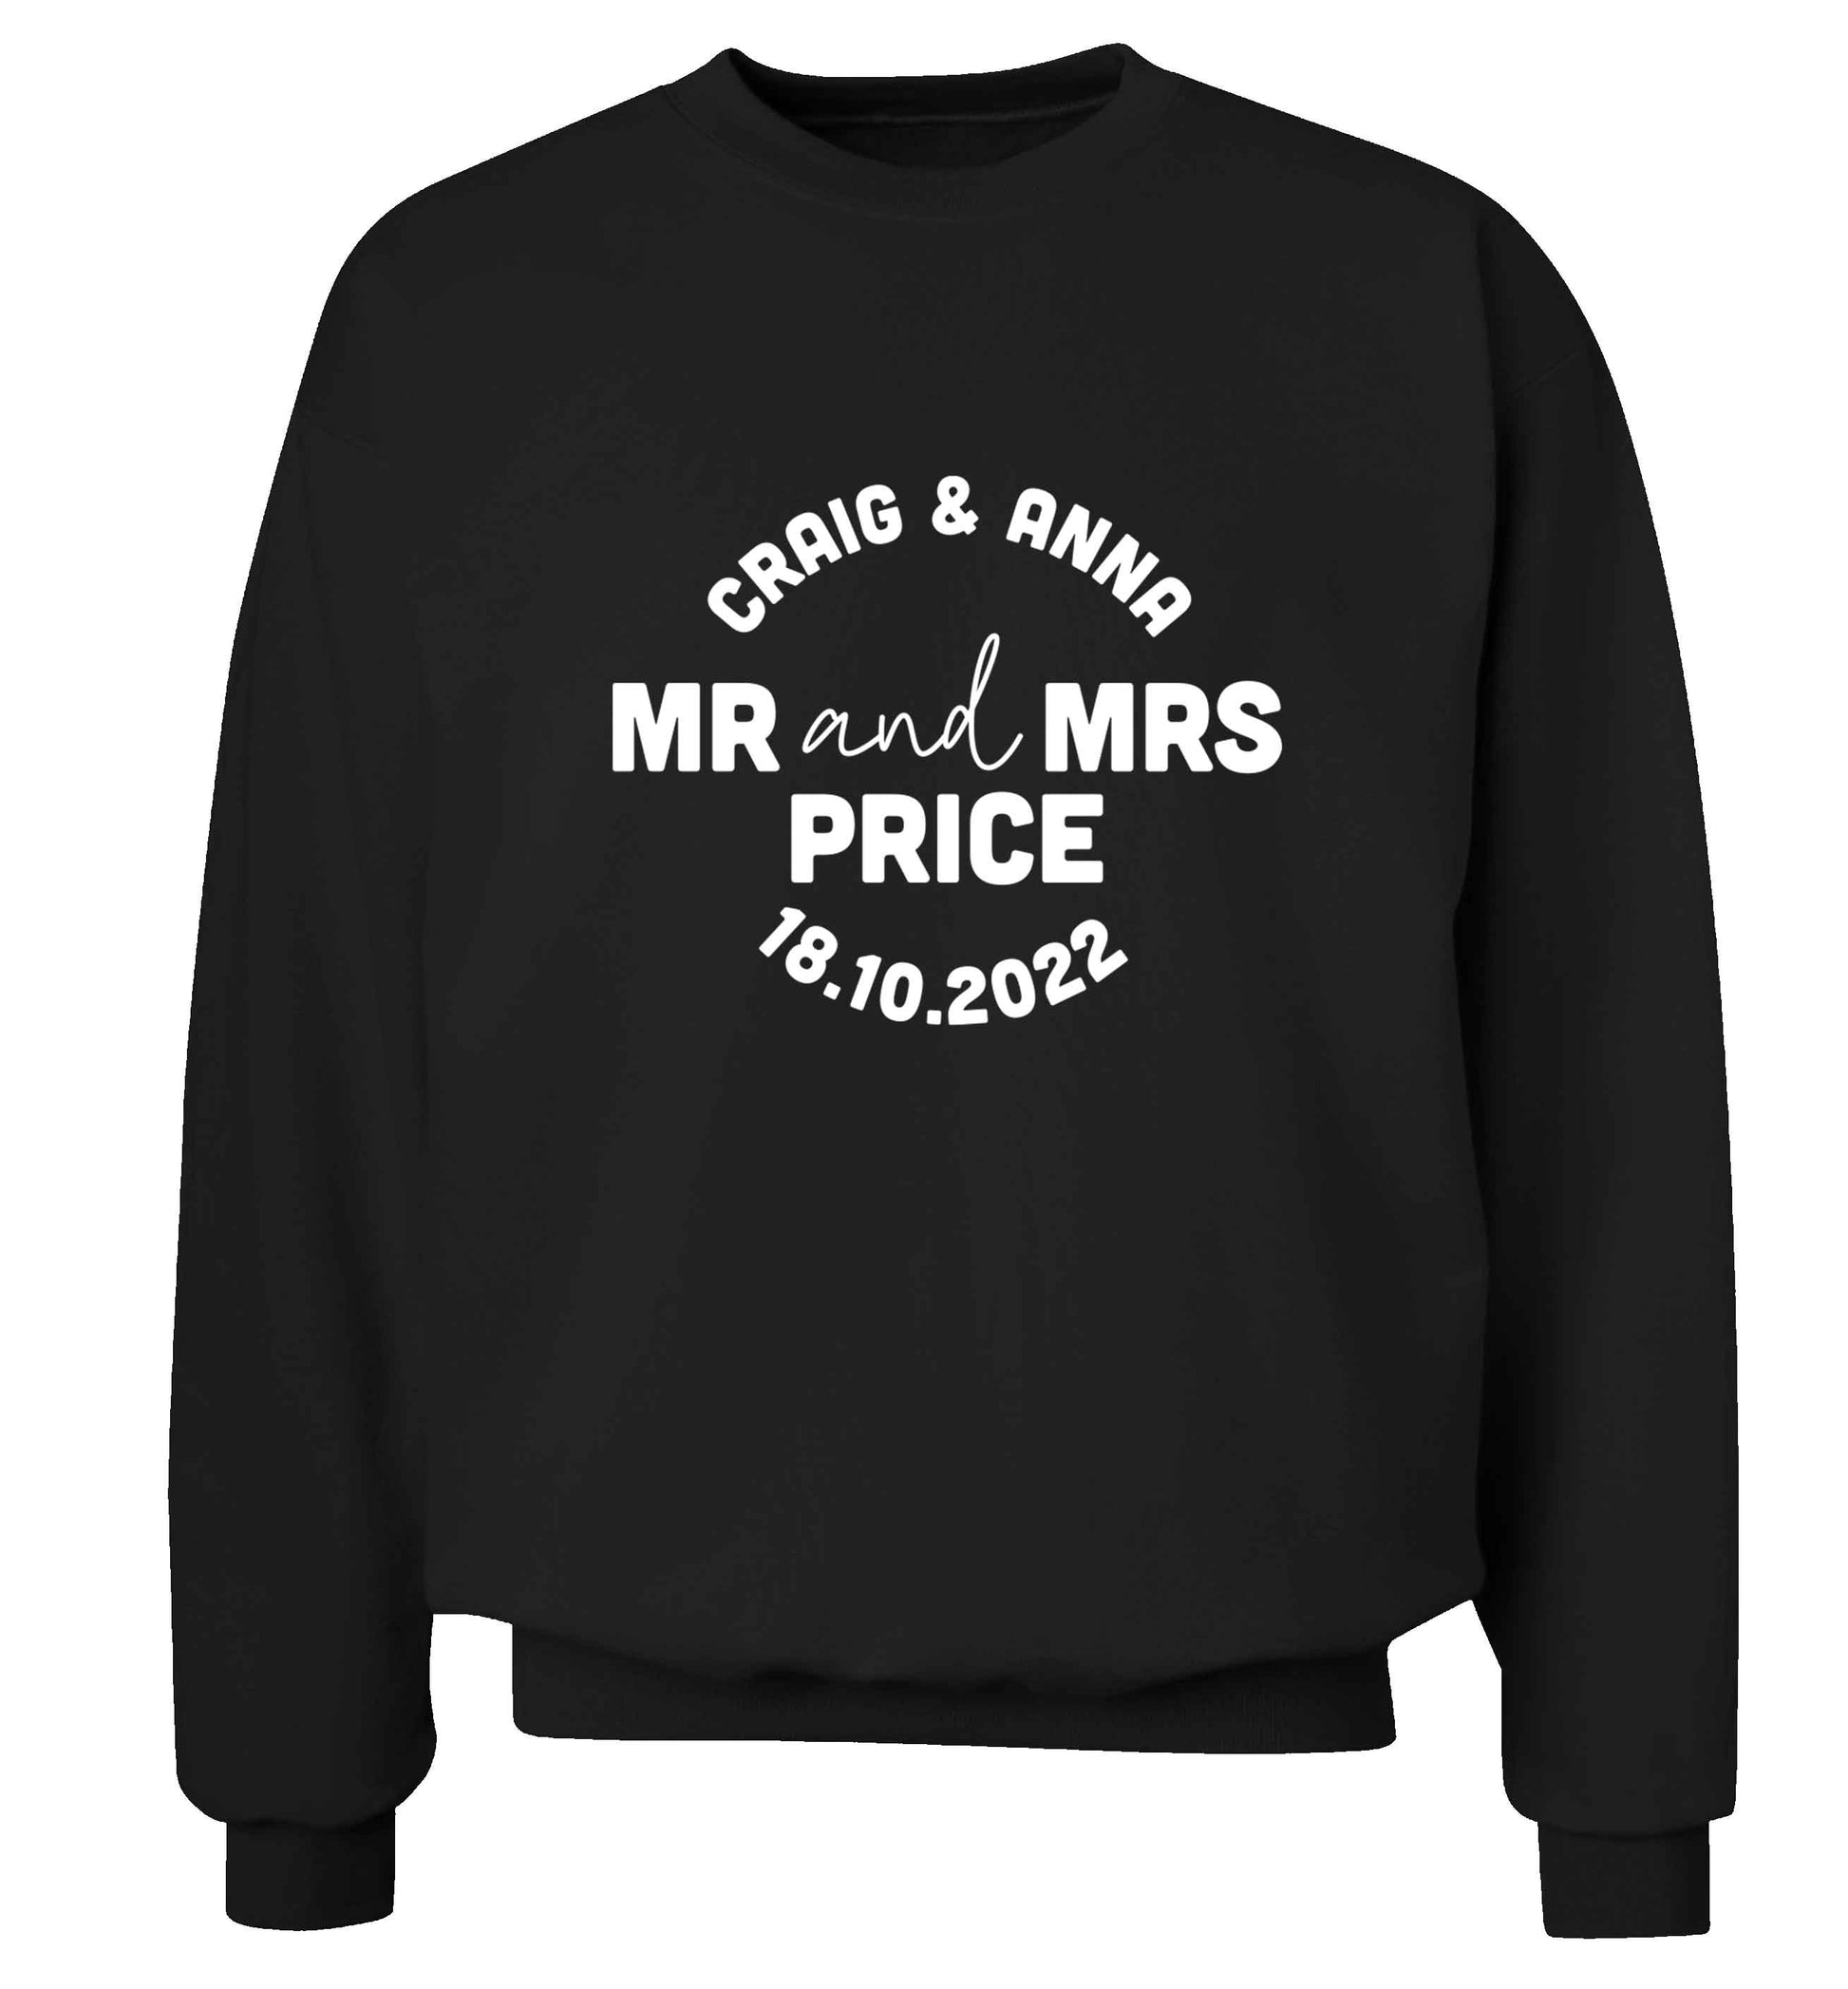 Personalised Mr and Mrs wedding and date! Ideal wedding favours! adult's unisex black sweater 2XL